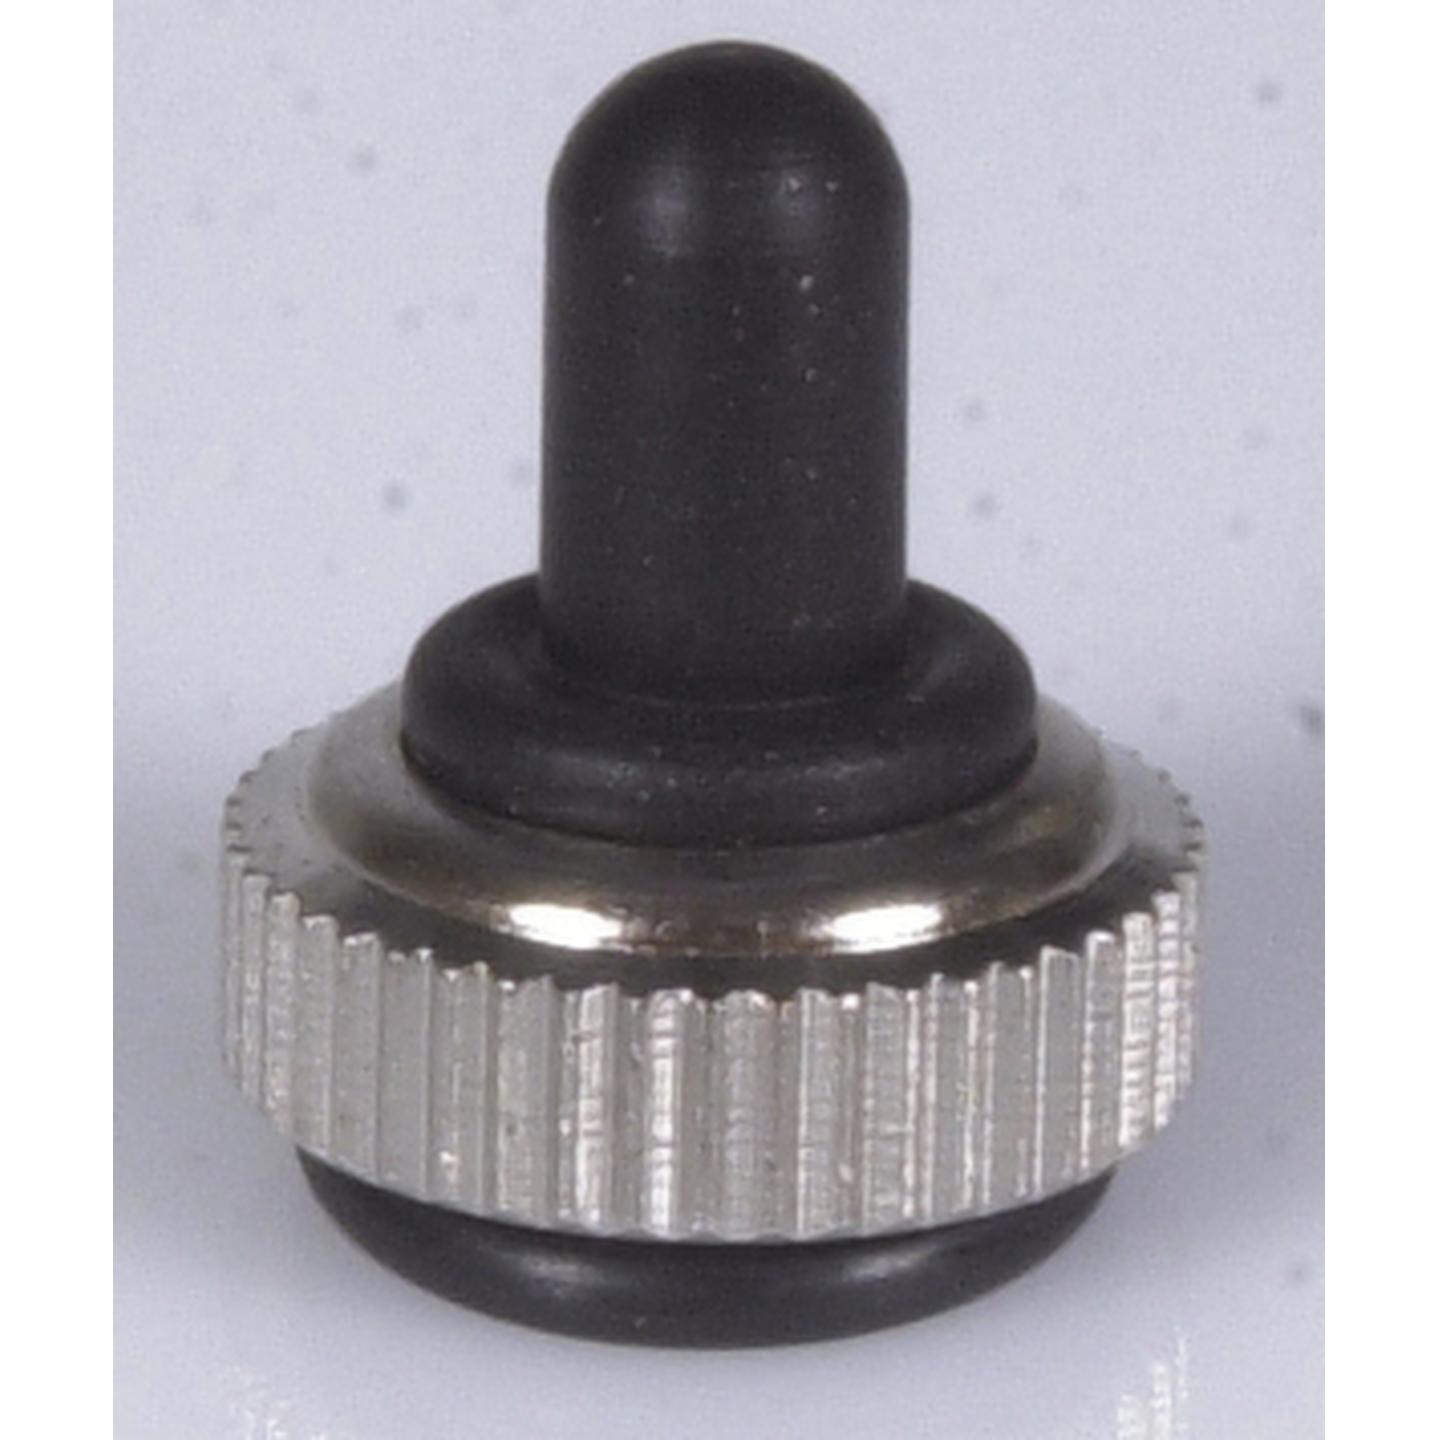 Rubber Boot with Seal to suit Mini Toggle Switch